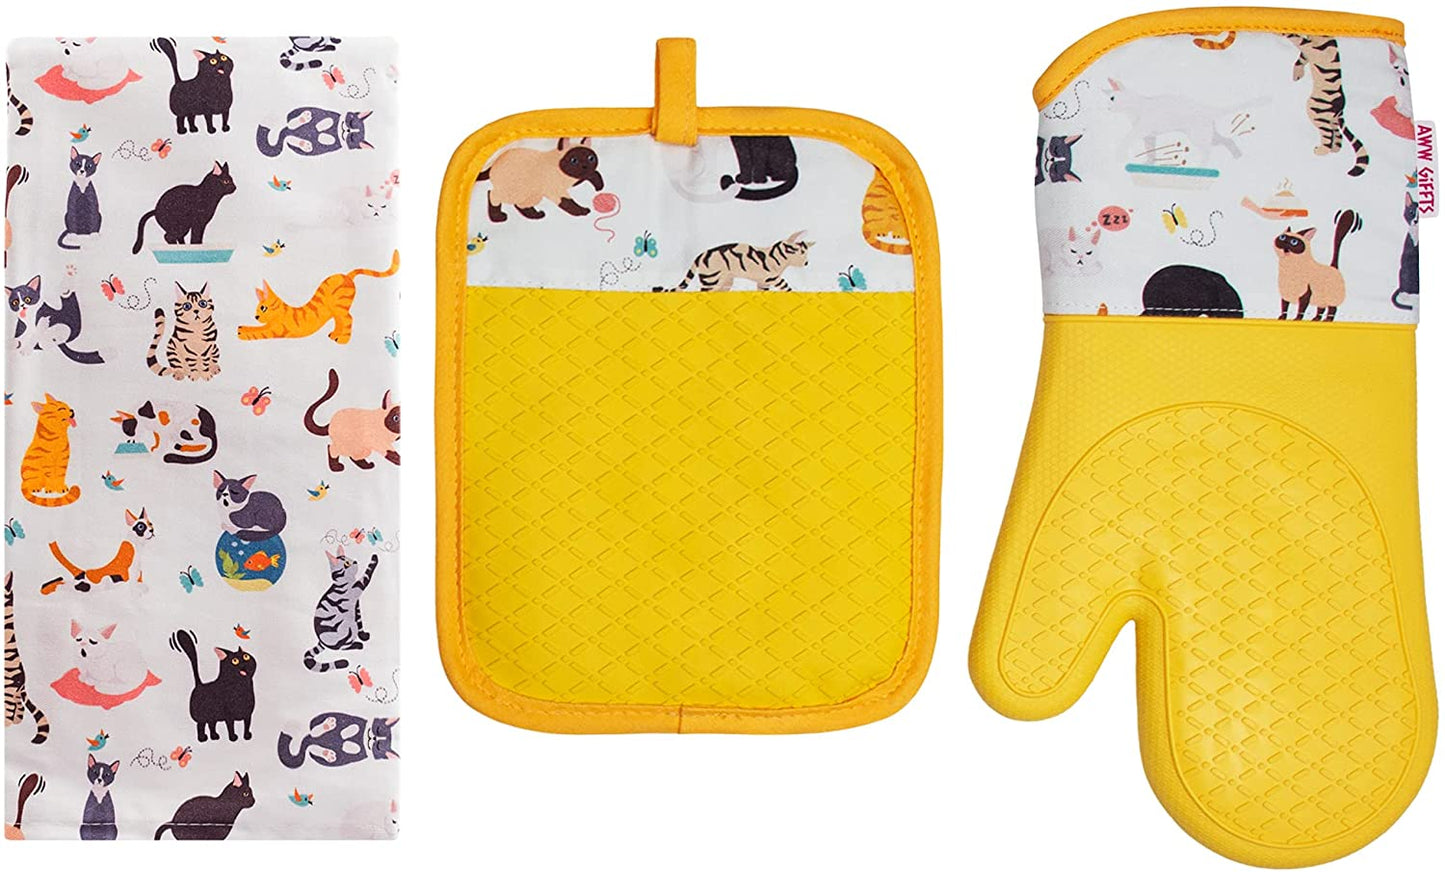 Spotted Dog Gift Company Cat Double Oven Mitt, Heat Resistant Double Oven Gloves, Cute Cats Kitchen Oven Mitts, Cooking Baking Kitchen Accessories